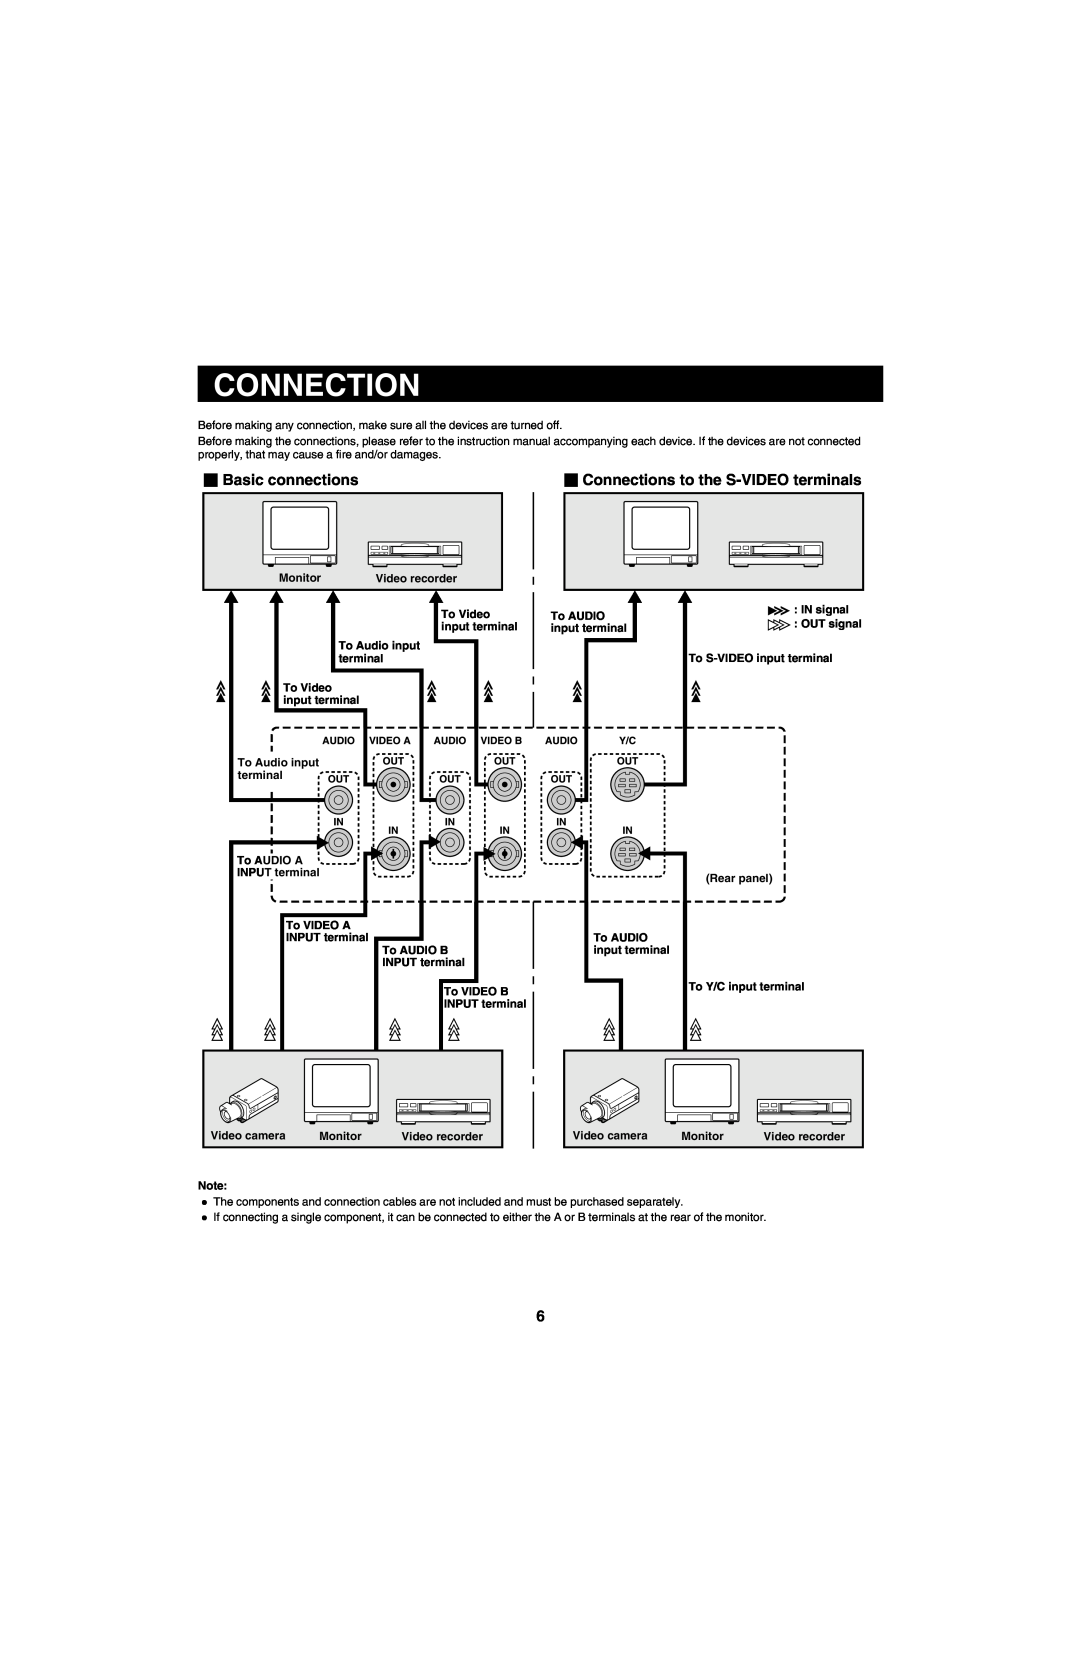 Sanyo VMC-8618, VMC-8613 instruction manual Basic connections, Connections to the S-VIDEO terminals 